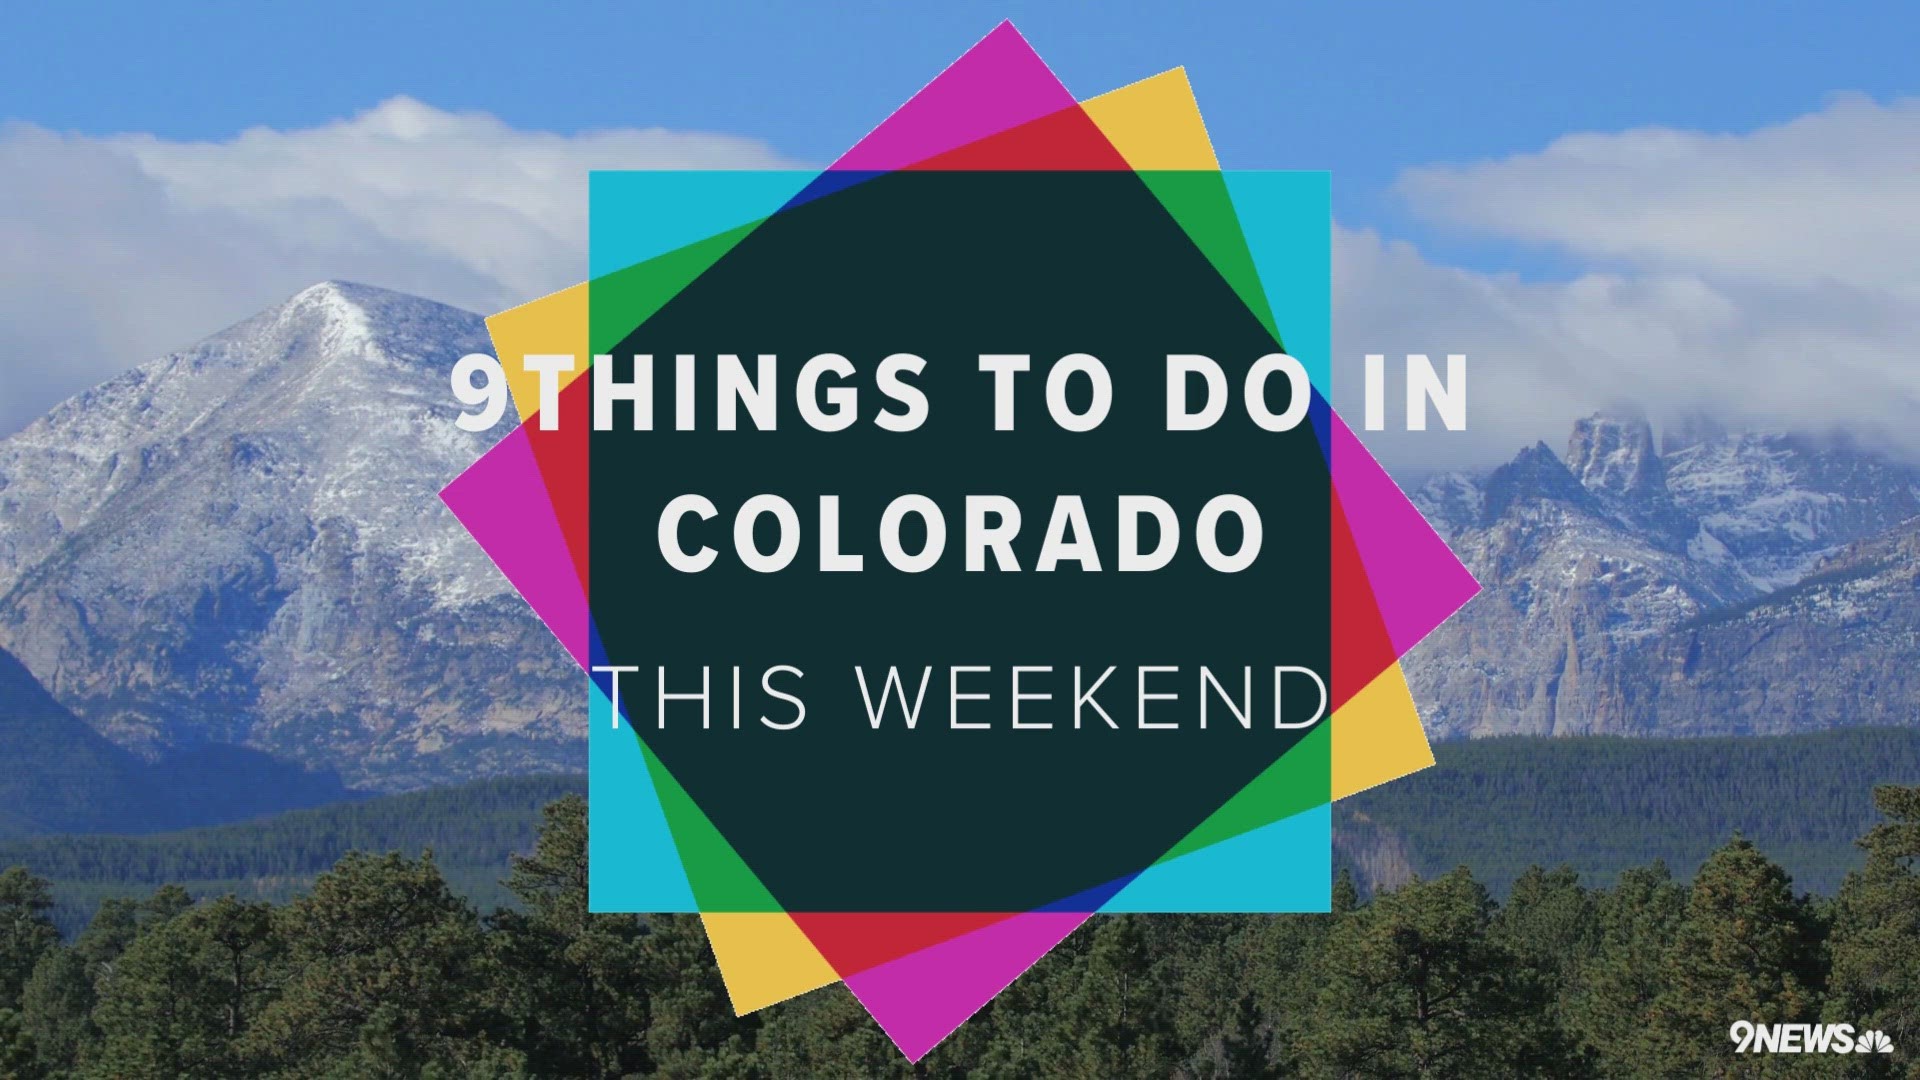 This weekend brings elf, tulip, science, kite, sneaker, vinyl record and Earth Day celebrations to Colorado.